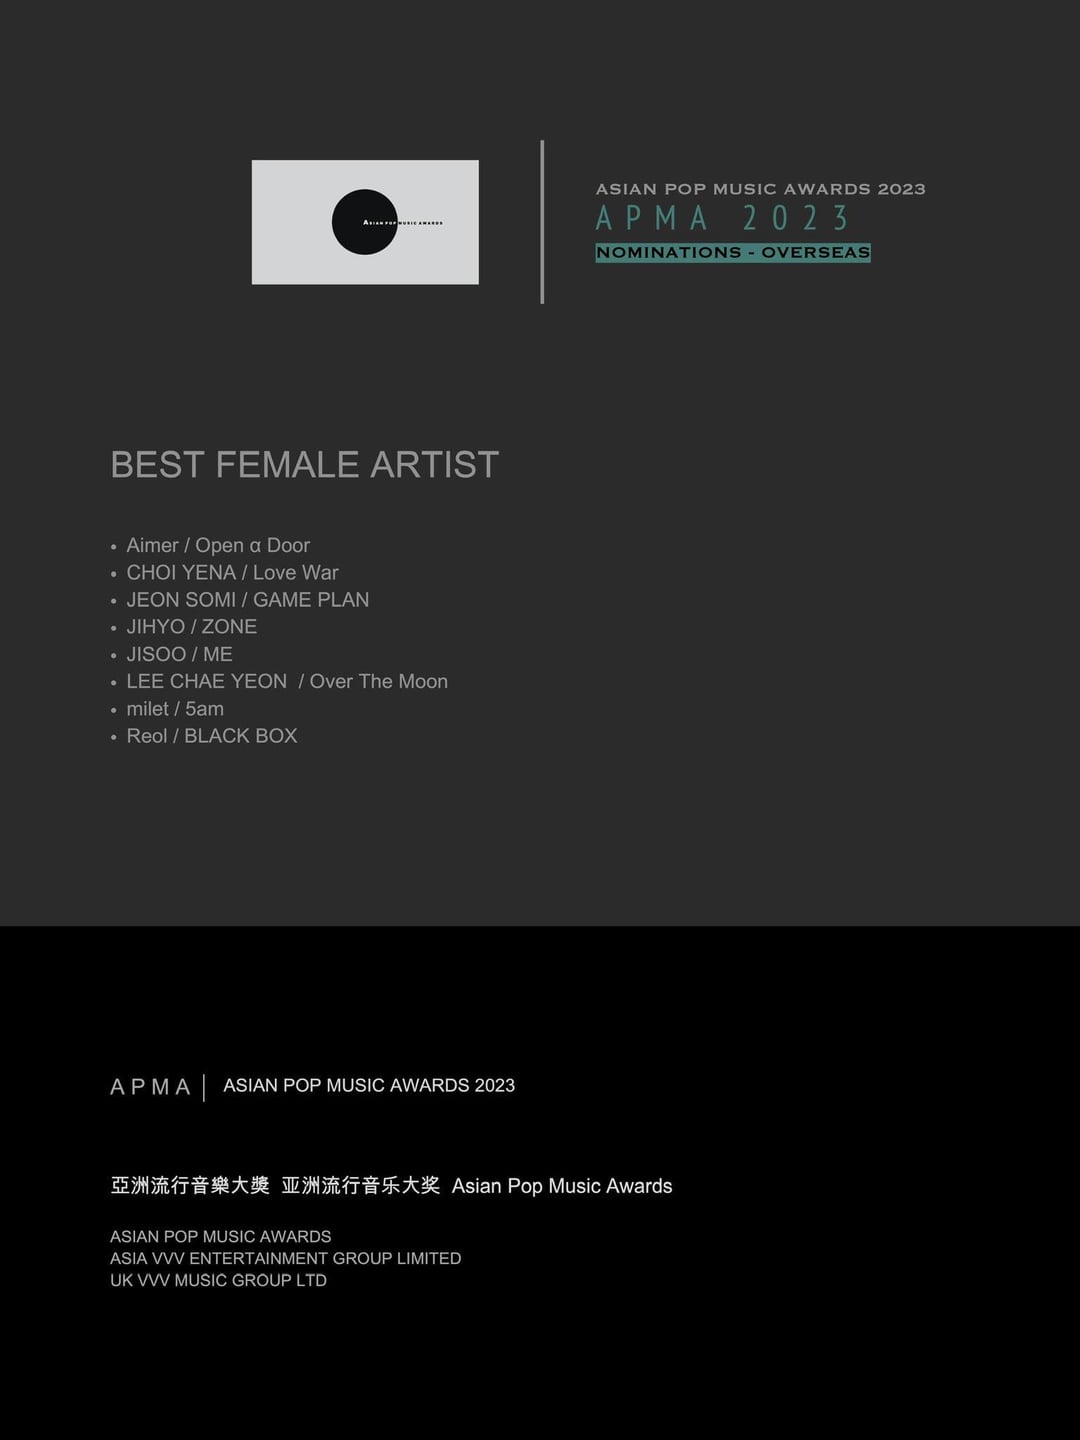 231130 JISOO has been nominated in FOUR OVERSEAS CATEGORIES at the Asian Pop Music Awards 2023 including ‘Best Female Artist’, ‘Best Dance Performance’, ‘Best Music Video’ & ‘Song of The Year’!